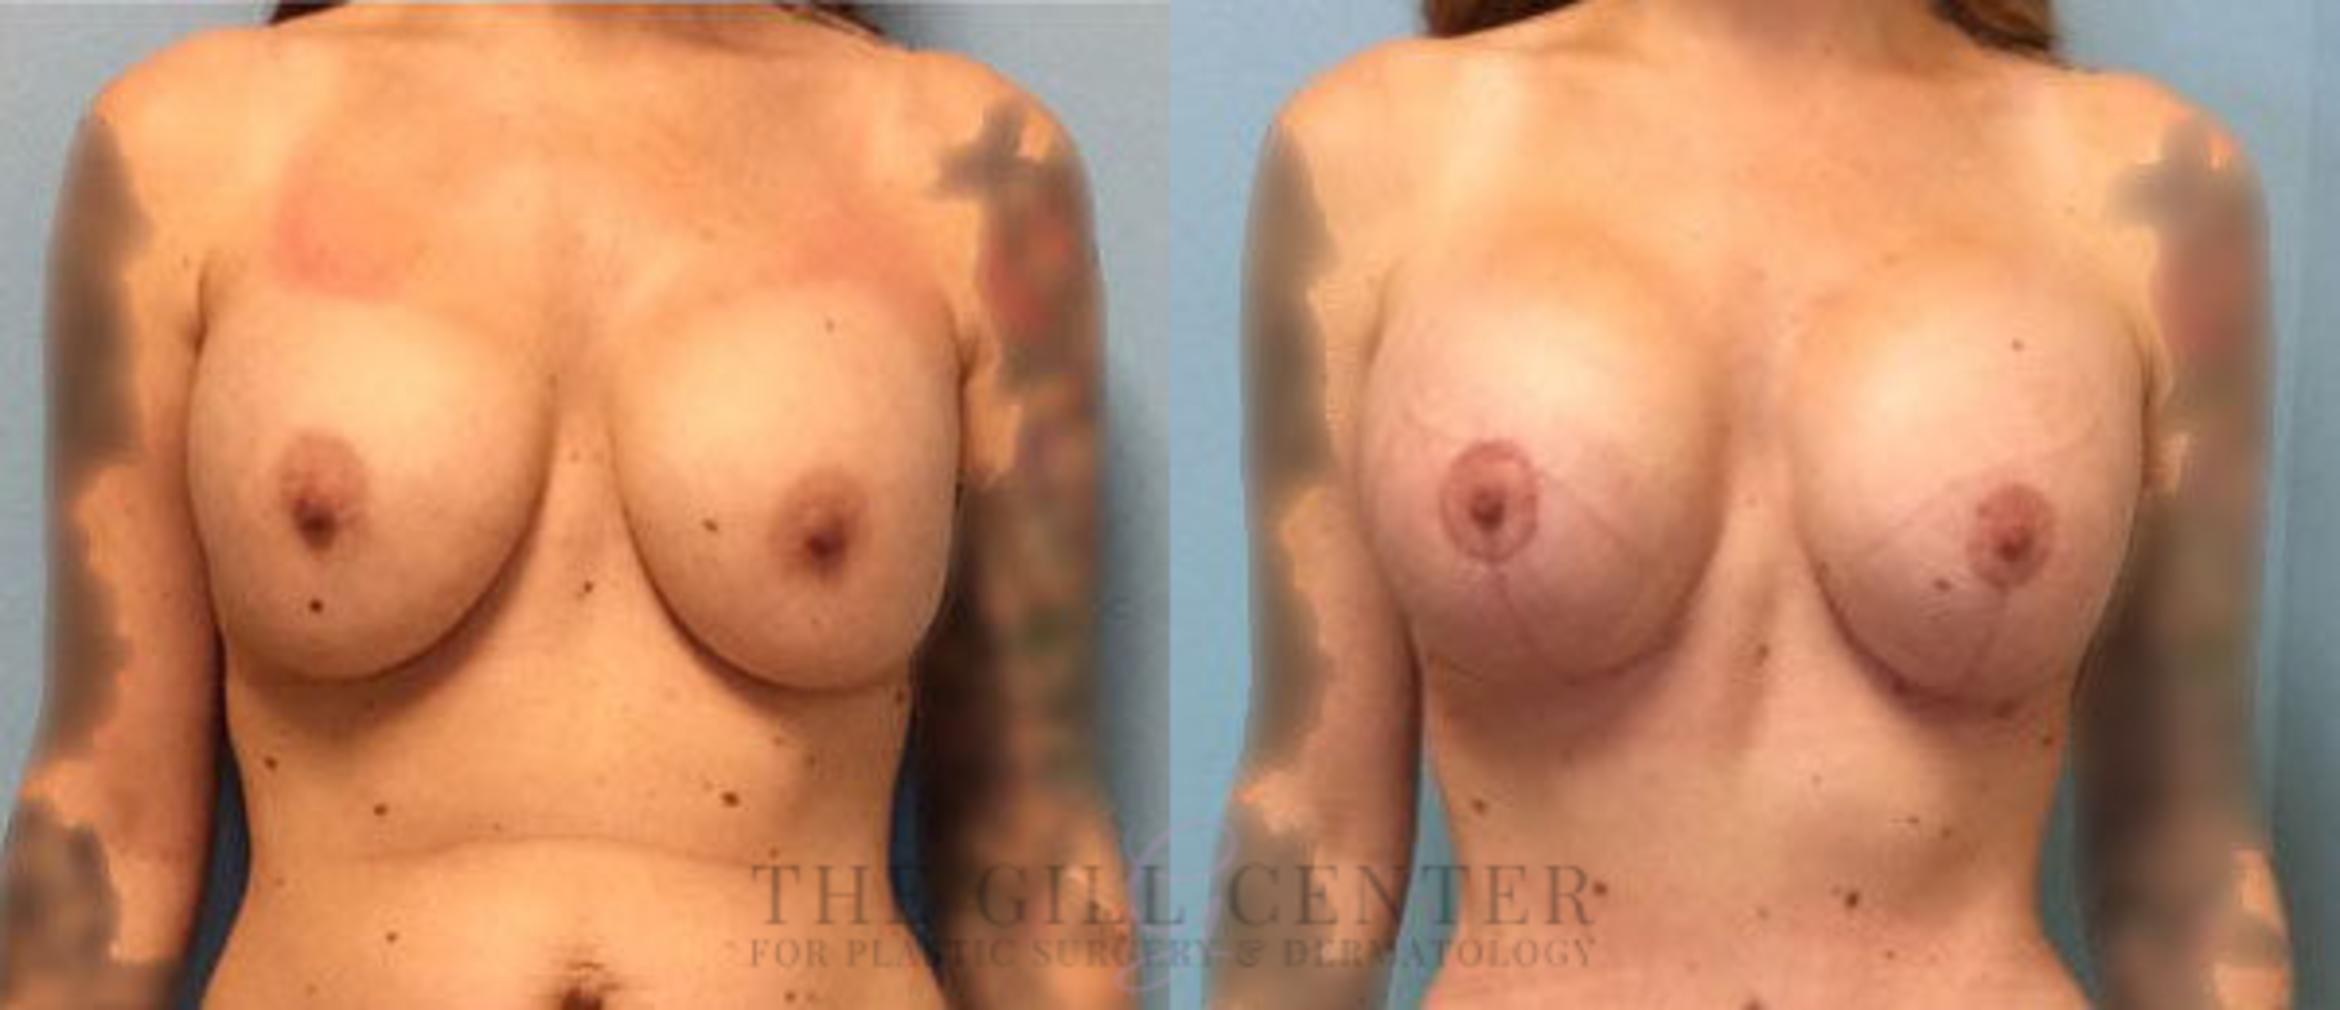 Implant Exchange Case 349 Before & After Front | The Woodlands, TX | The Gill Center for Plastic Surgery and Dermatology